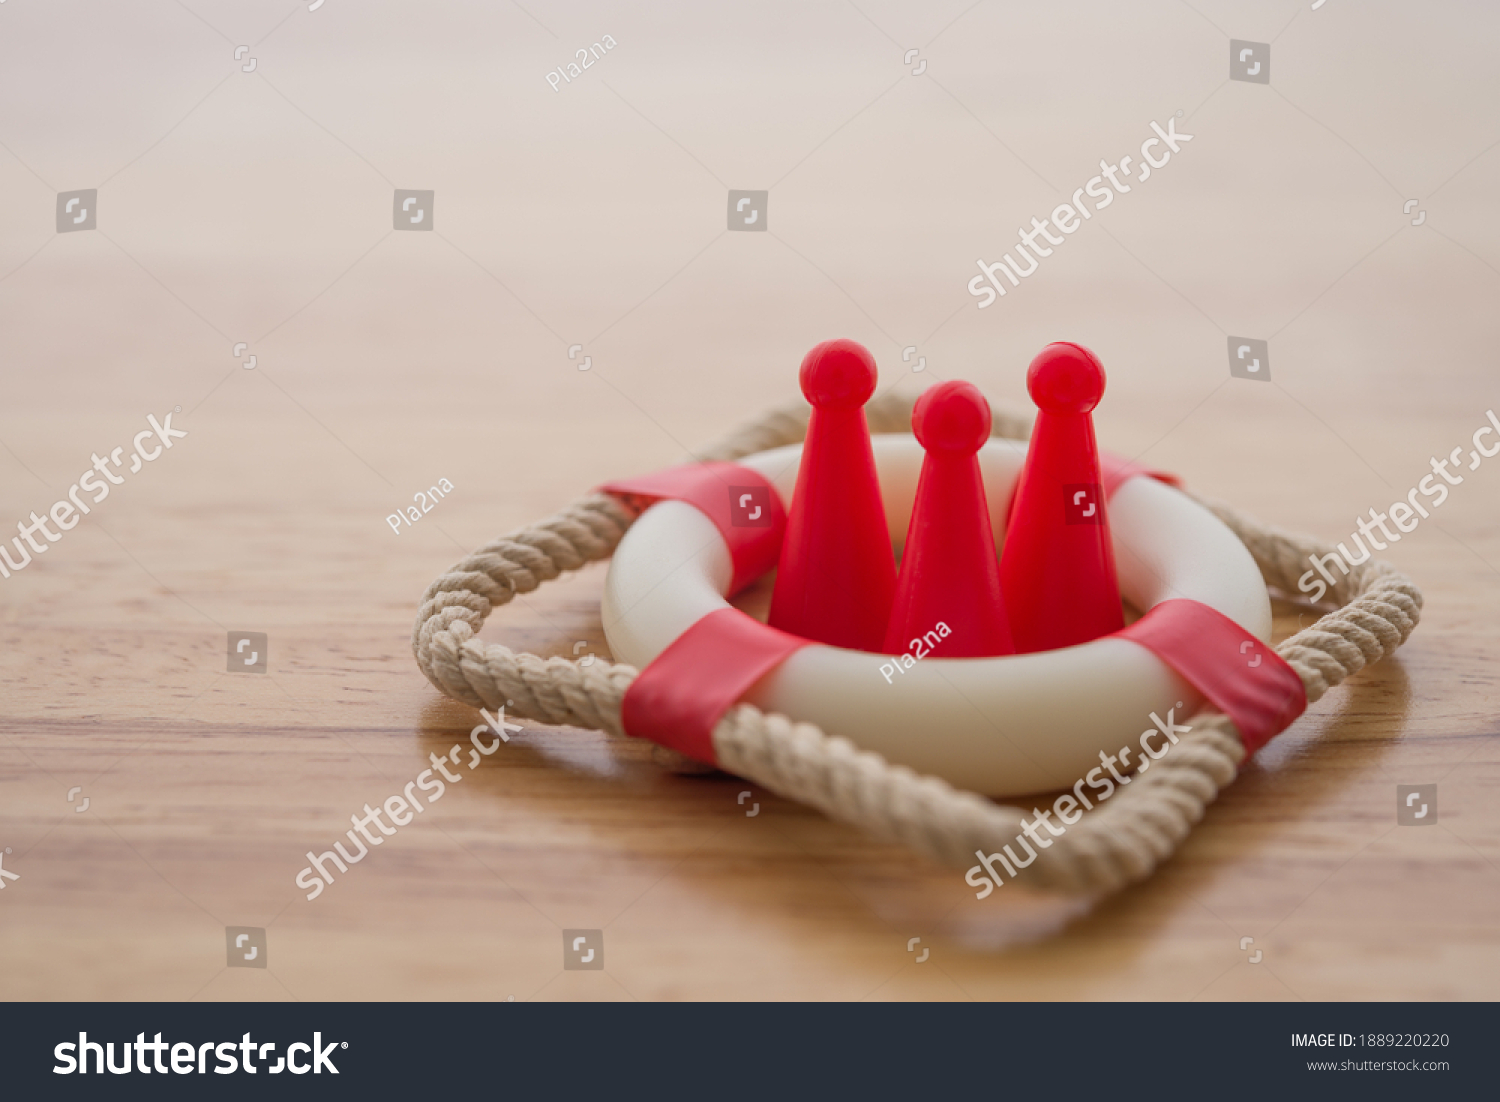 Health insurance or life insurance business and health care concept. People model in lifebuoy on wooden table background copy space. #1889220220